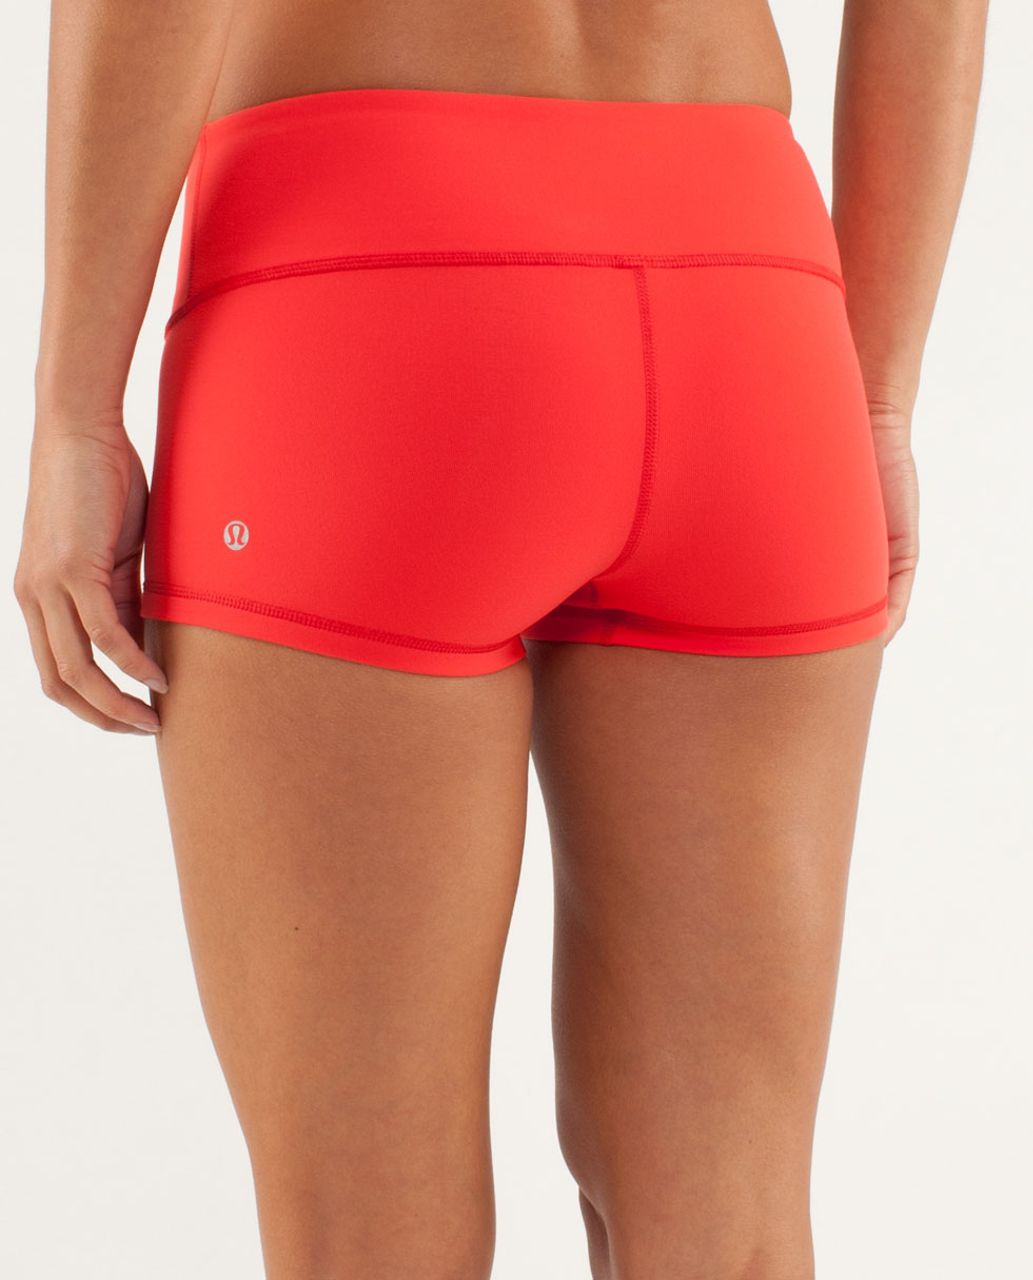 Lululemon Boogie Short - Love Red / Slope Stripe Love Red Heathered Fiery Red